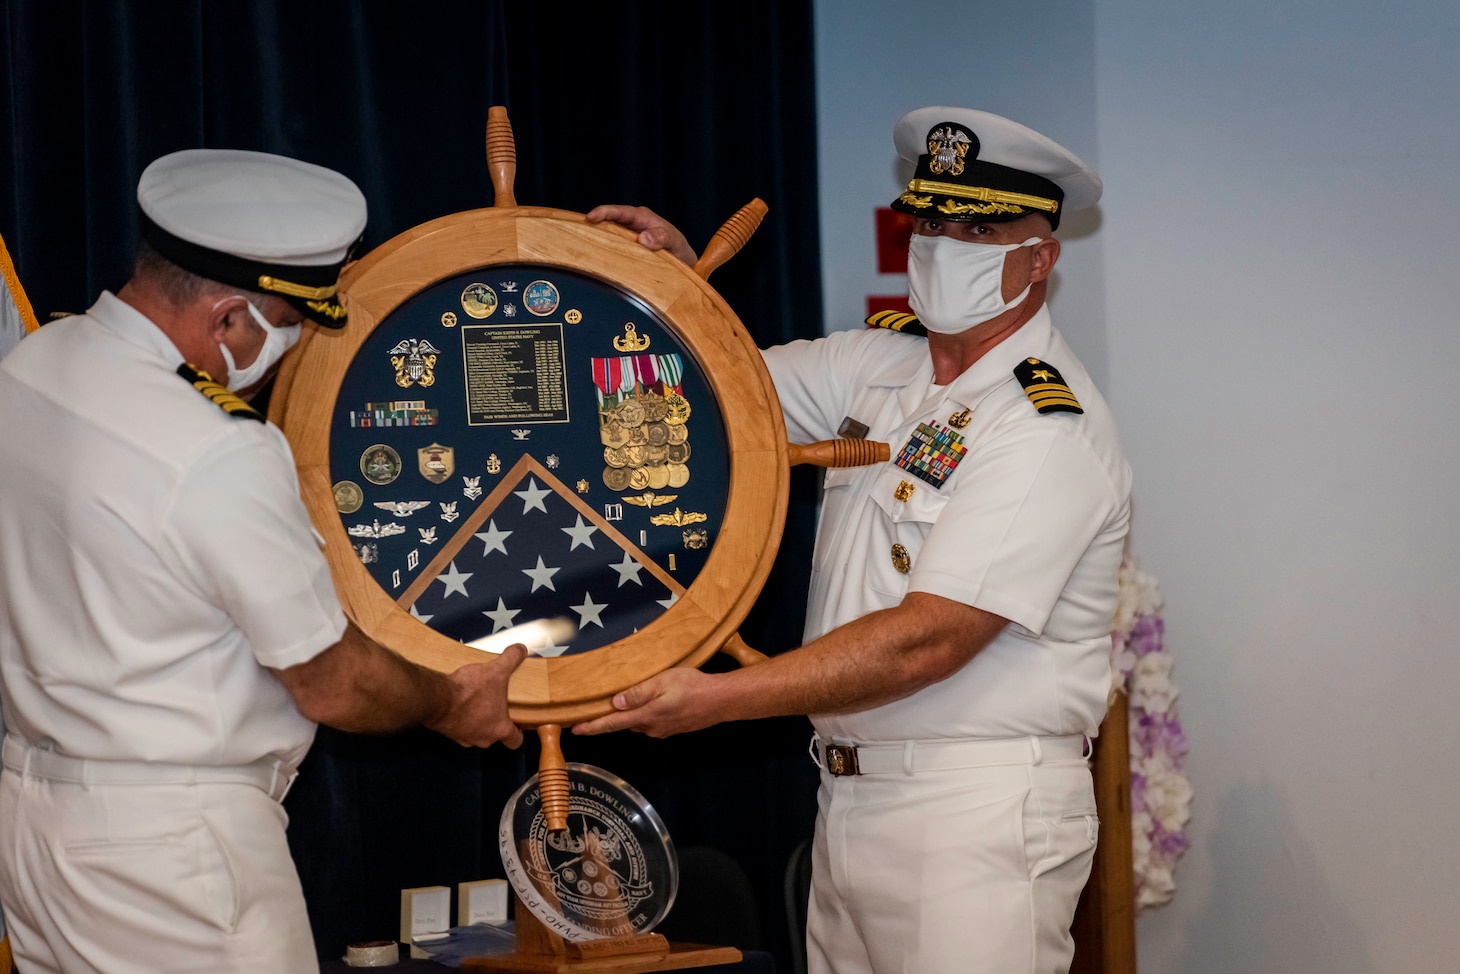 Capt. Keith Dowling, right, receives a shadow box as part of his retirement ceremony held during a change of command for the Center for Explosive Ordnance Disposal and Diving  (CEODD), Sept. 22.  Dowling retired after nearly 38 years of service in the U.S. Navy.